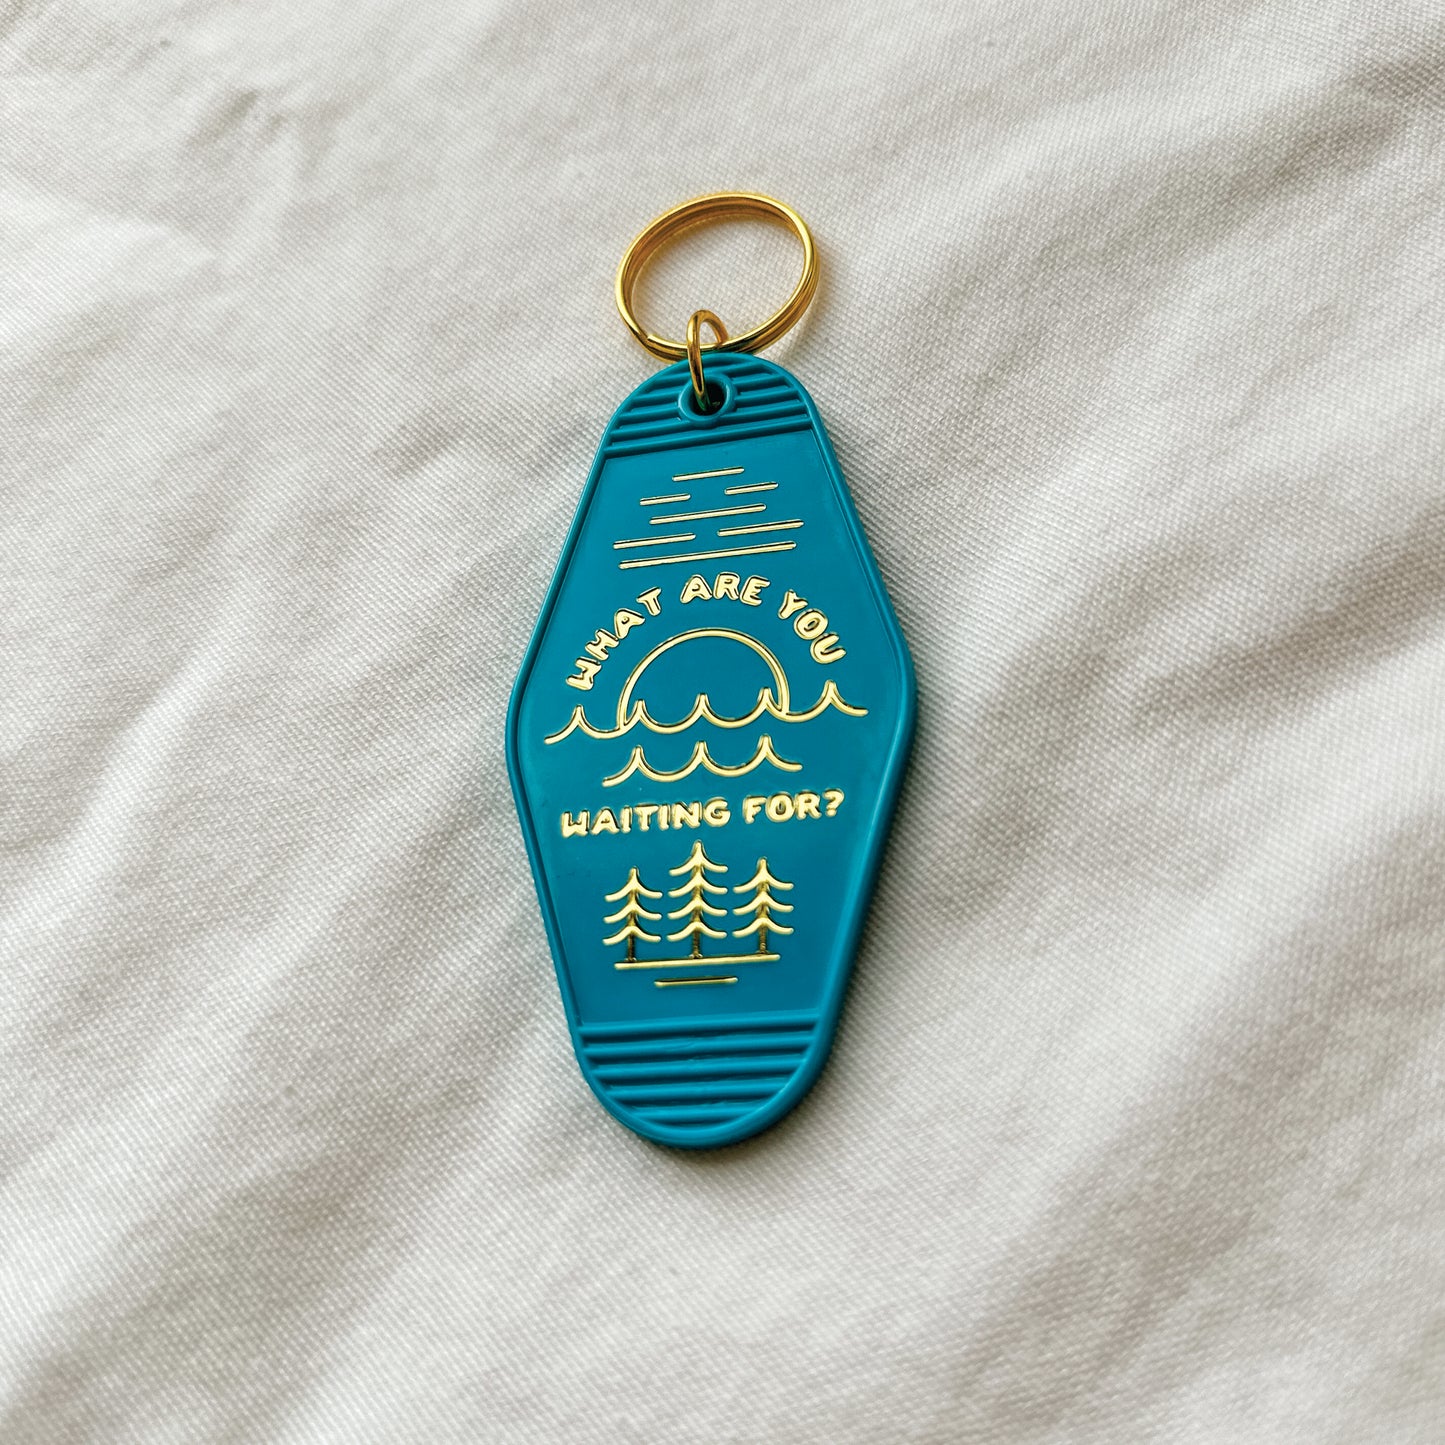 What Are You Waiting For Hotel Keychain